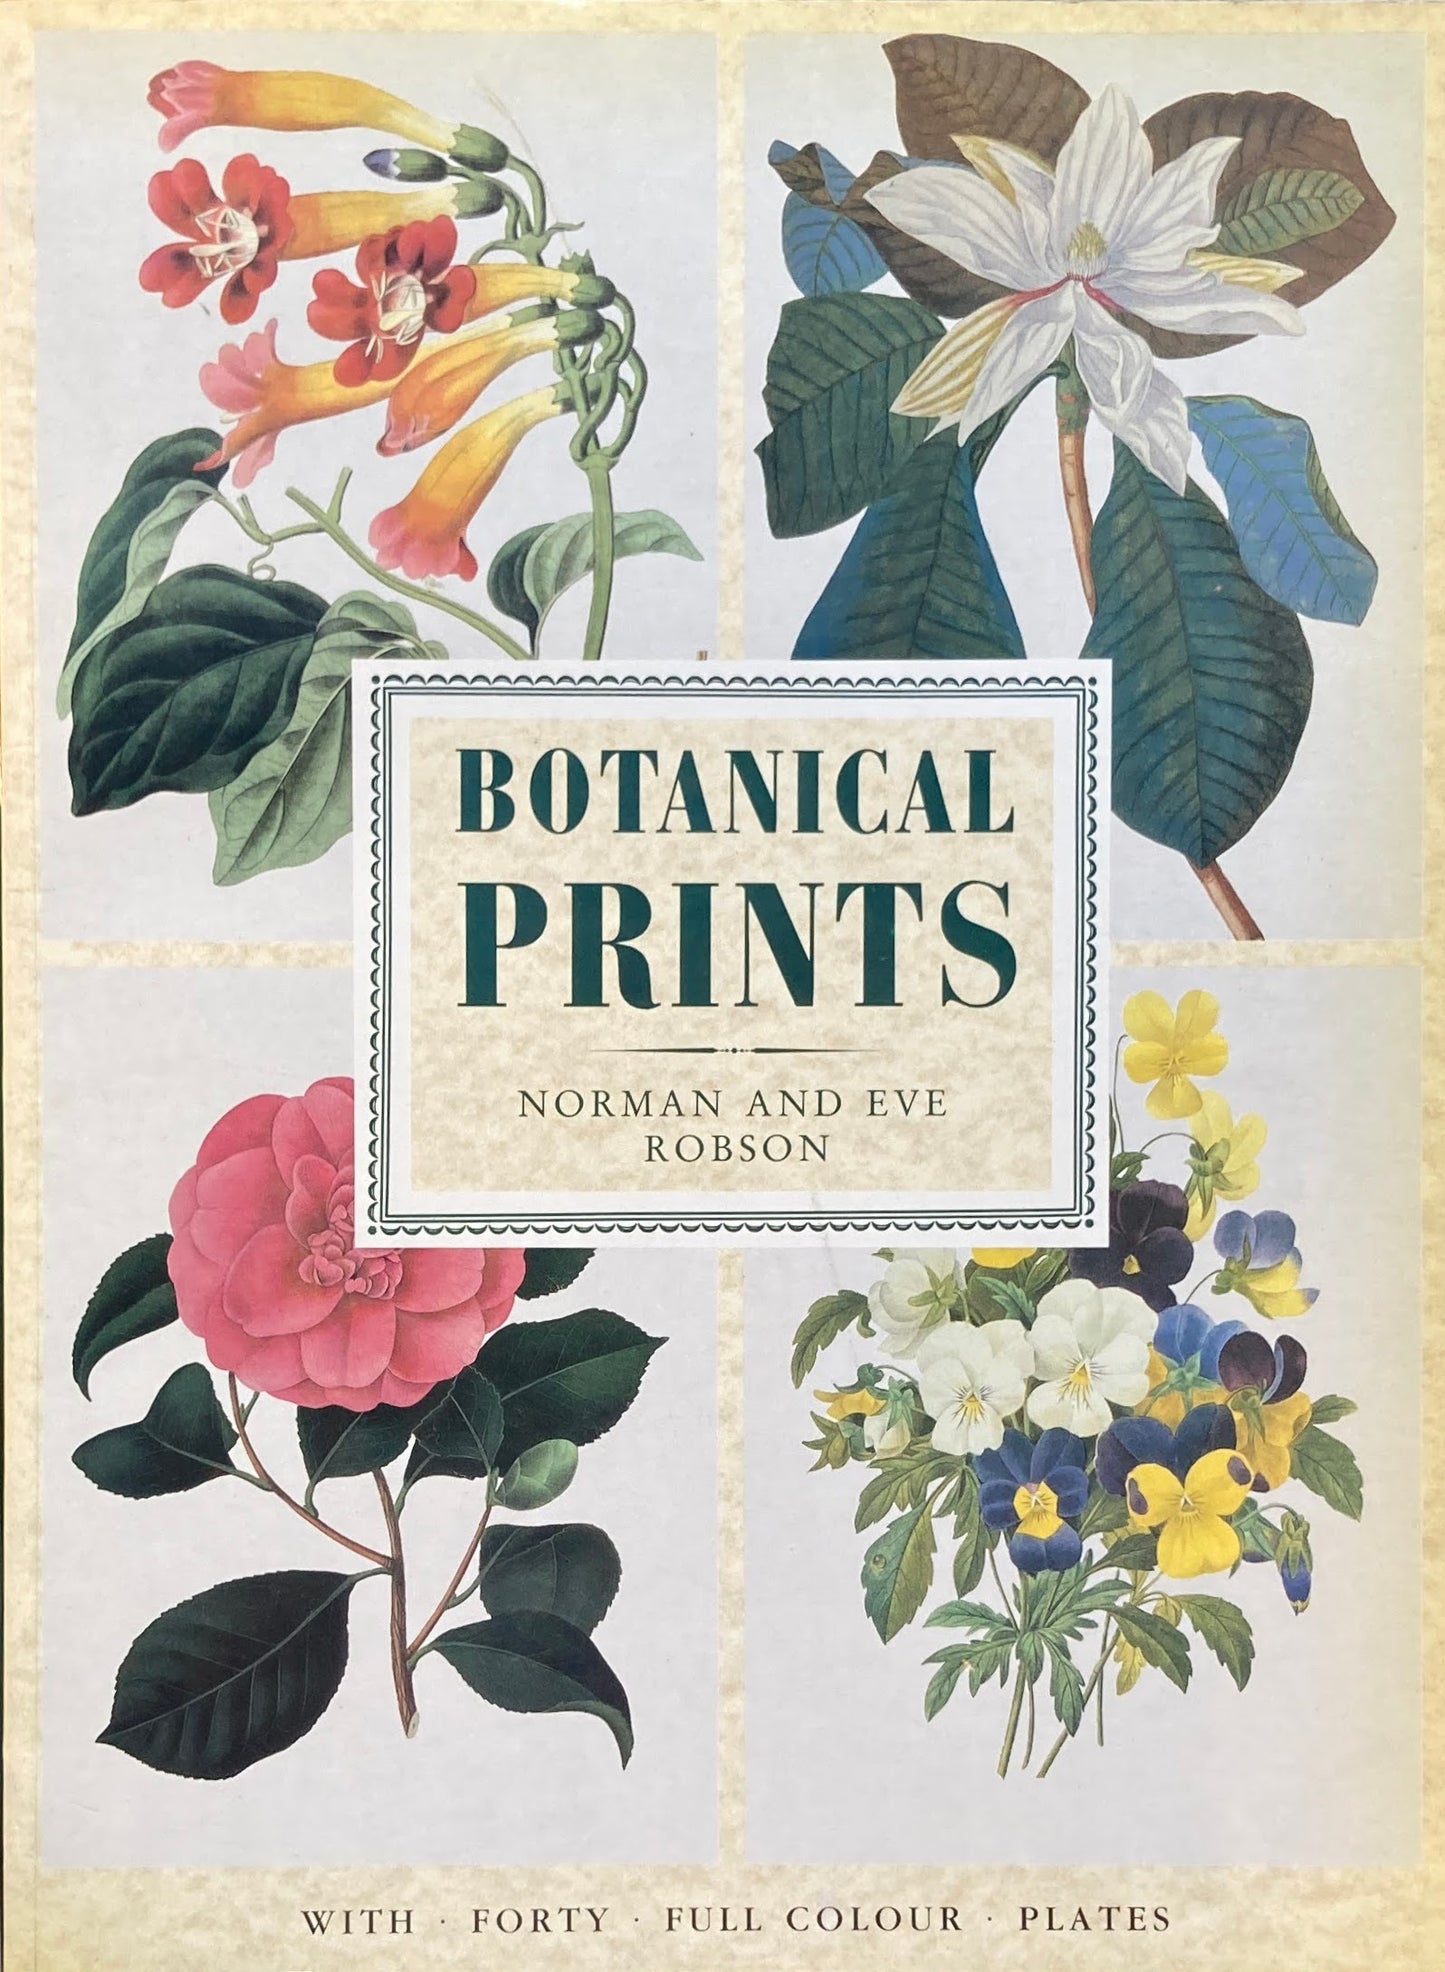 Botanical Prints　Norman and Eve Robson　Poster Art Series